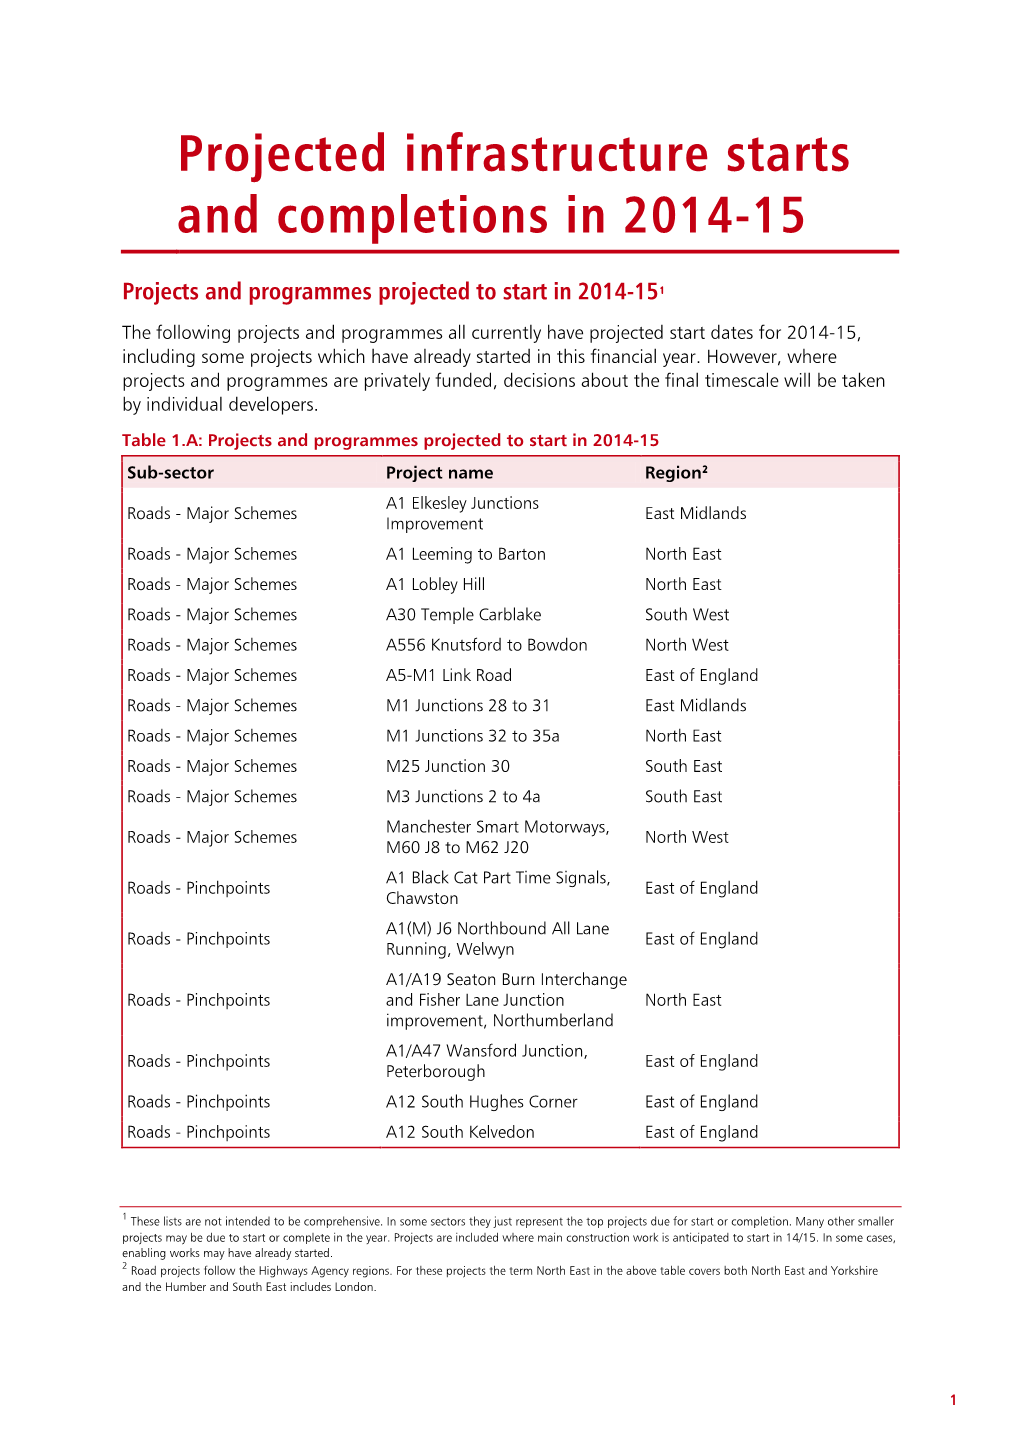 Projected Infrastructure Starts and Completions in 2014-15